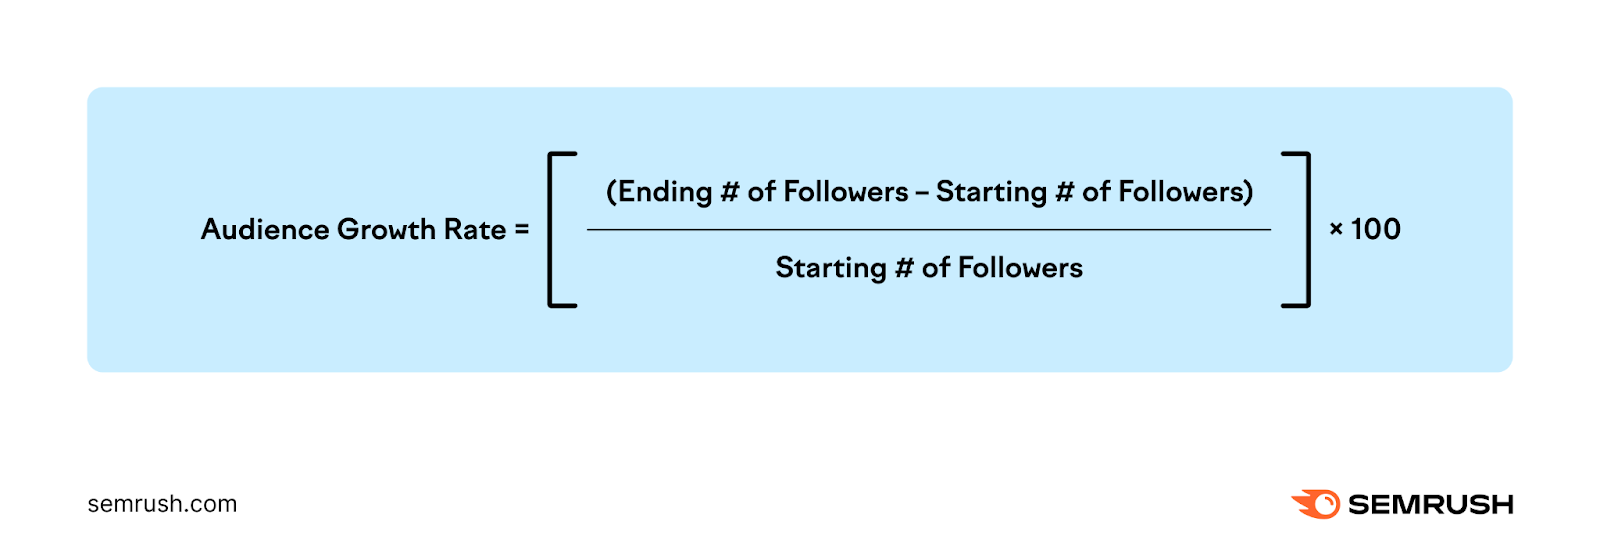 an image showing a formula for how the audience growth rate is calculated